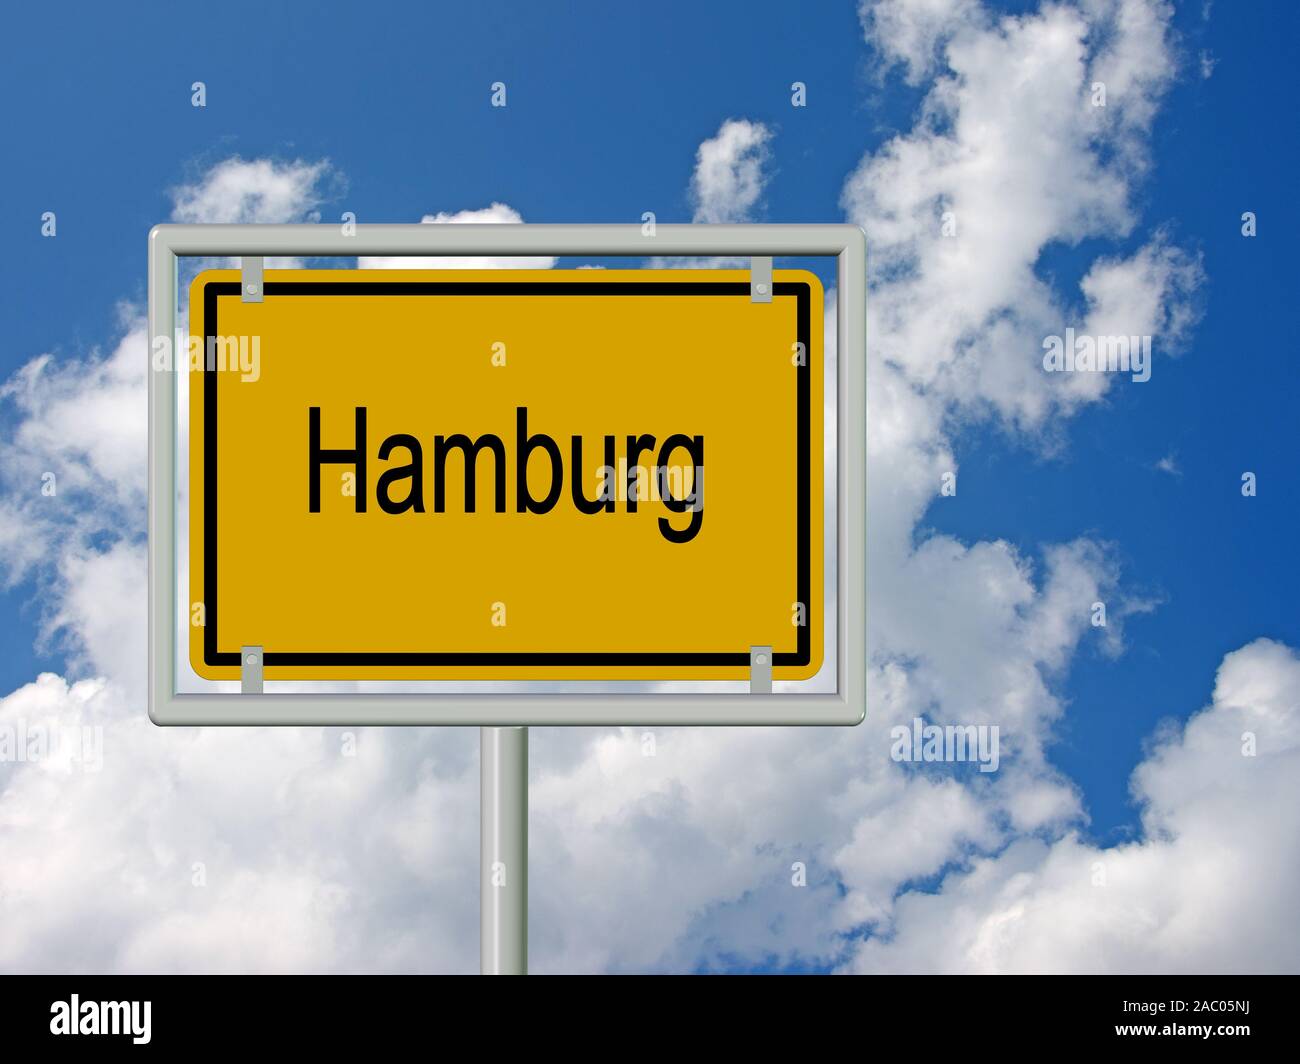 Hamburg city sign in front of sky and clouds Stock Photo